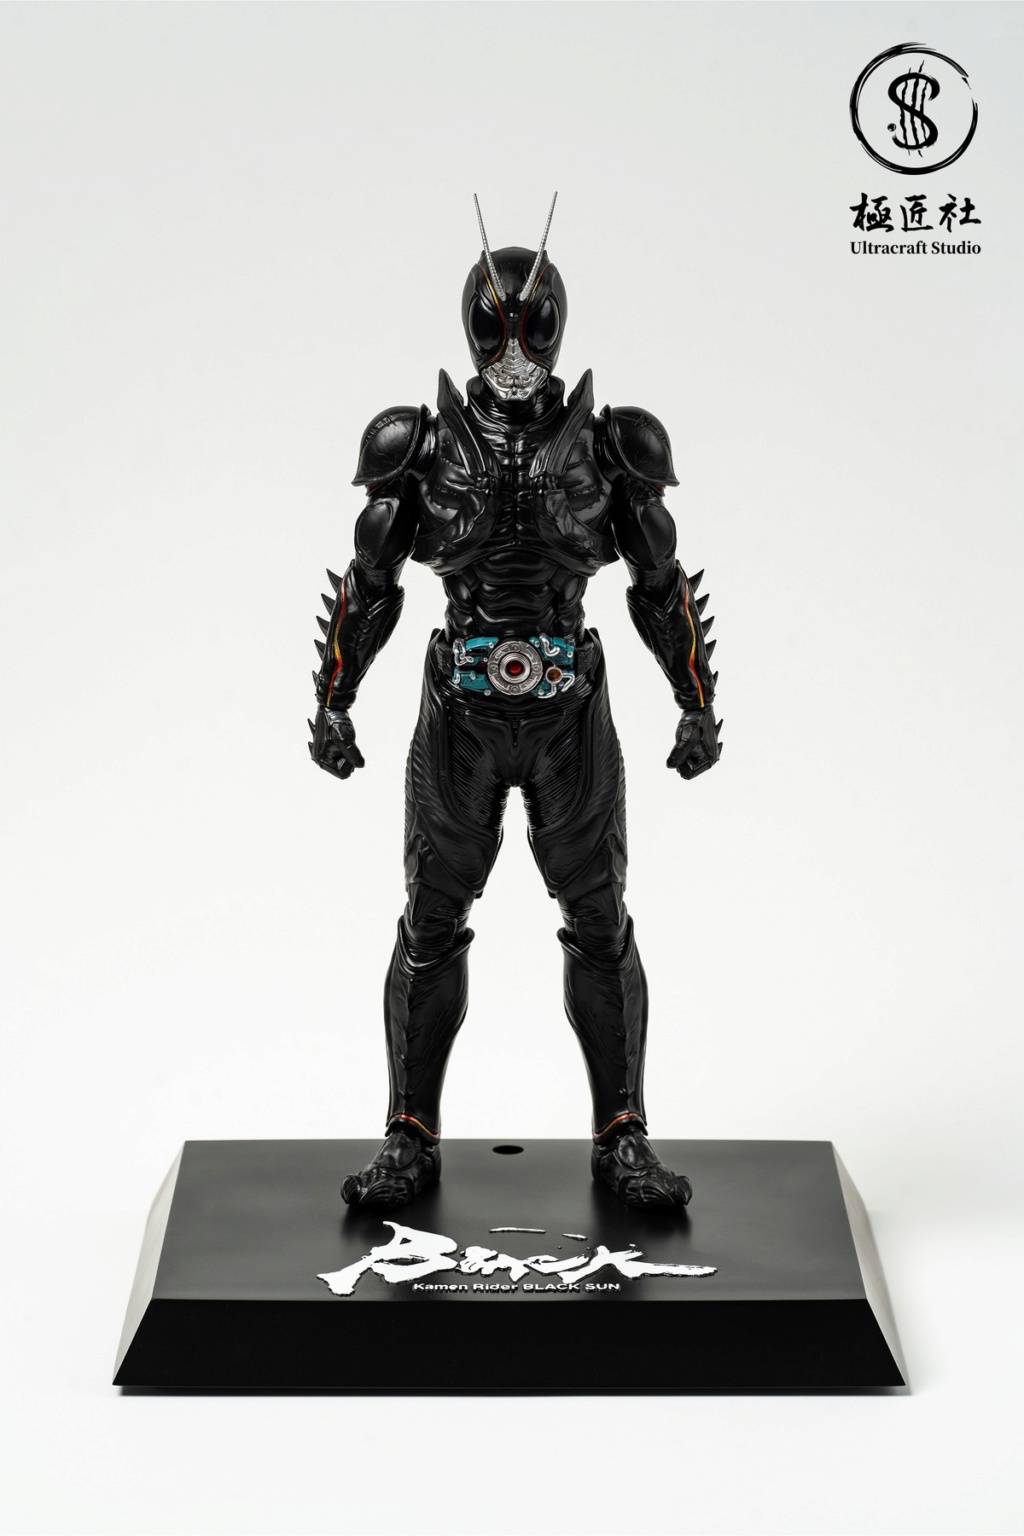 NEW PRODUCT: Ultracraft Studio: 1/6 Scale Black Hero (not what you think) 15144712